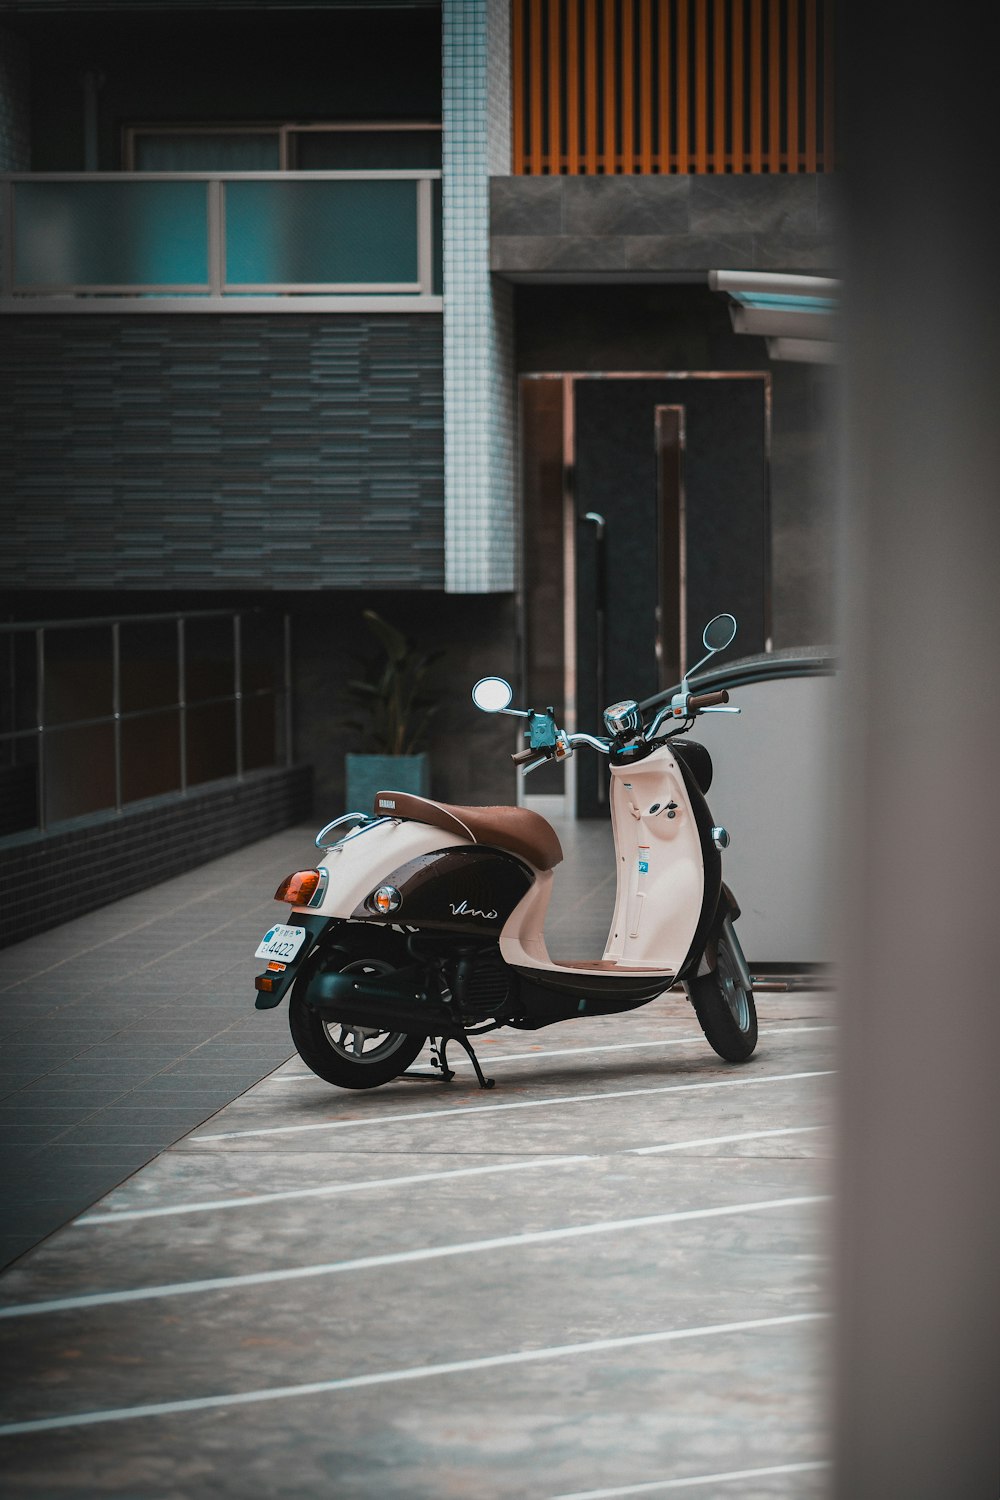 a scooter parked in a parking lot next to a building